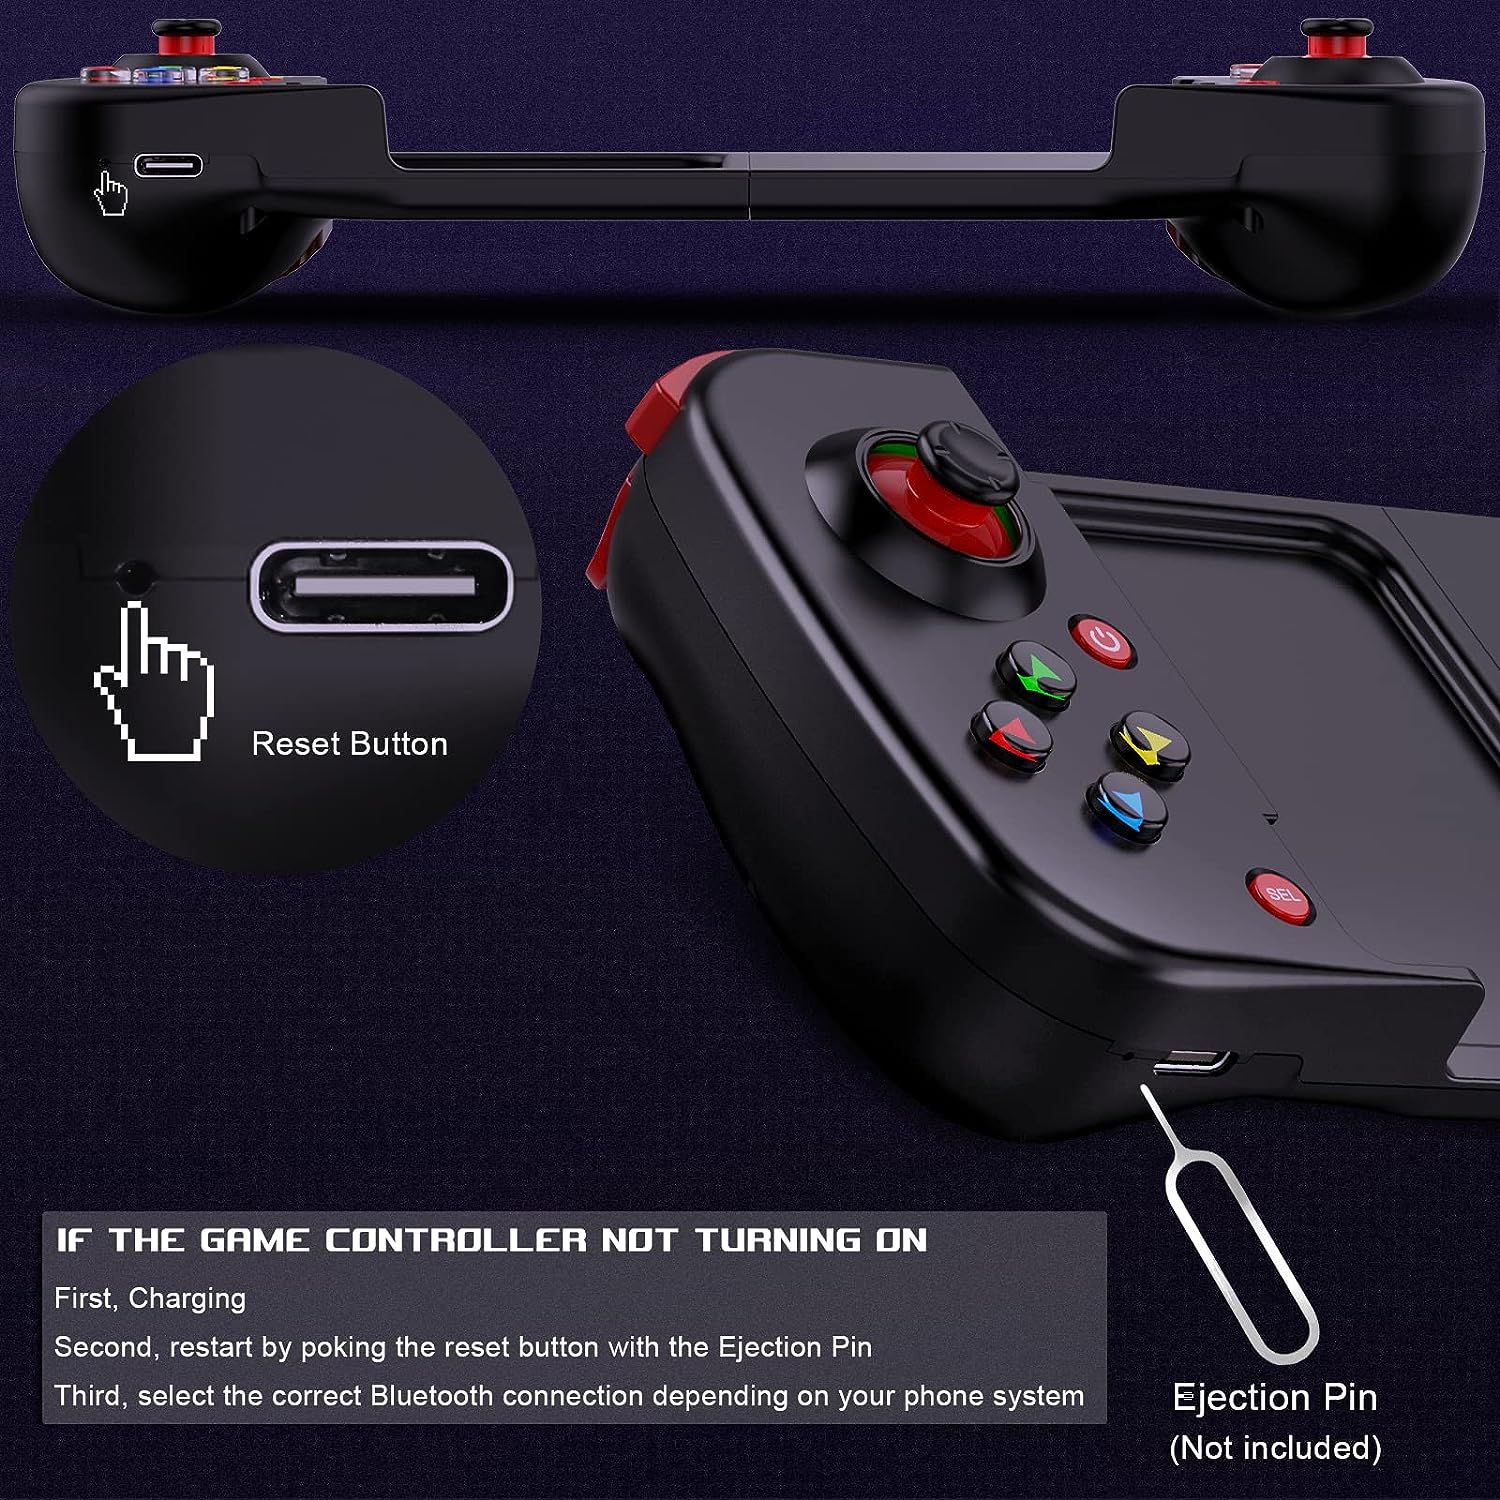 Samsung launches the Smartphone GamePad, an Android controller accessory